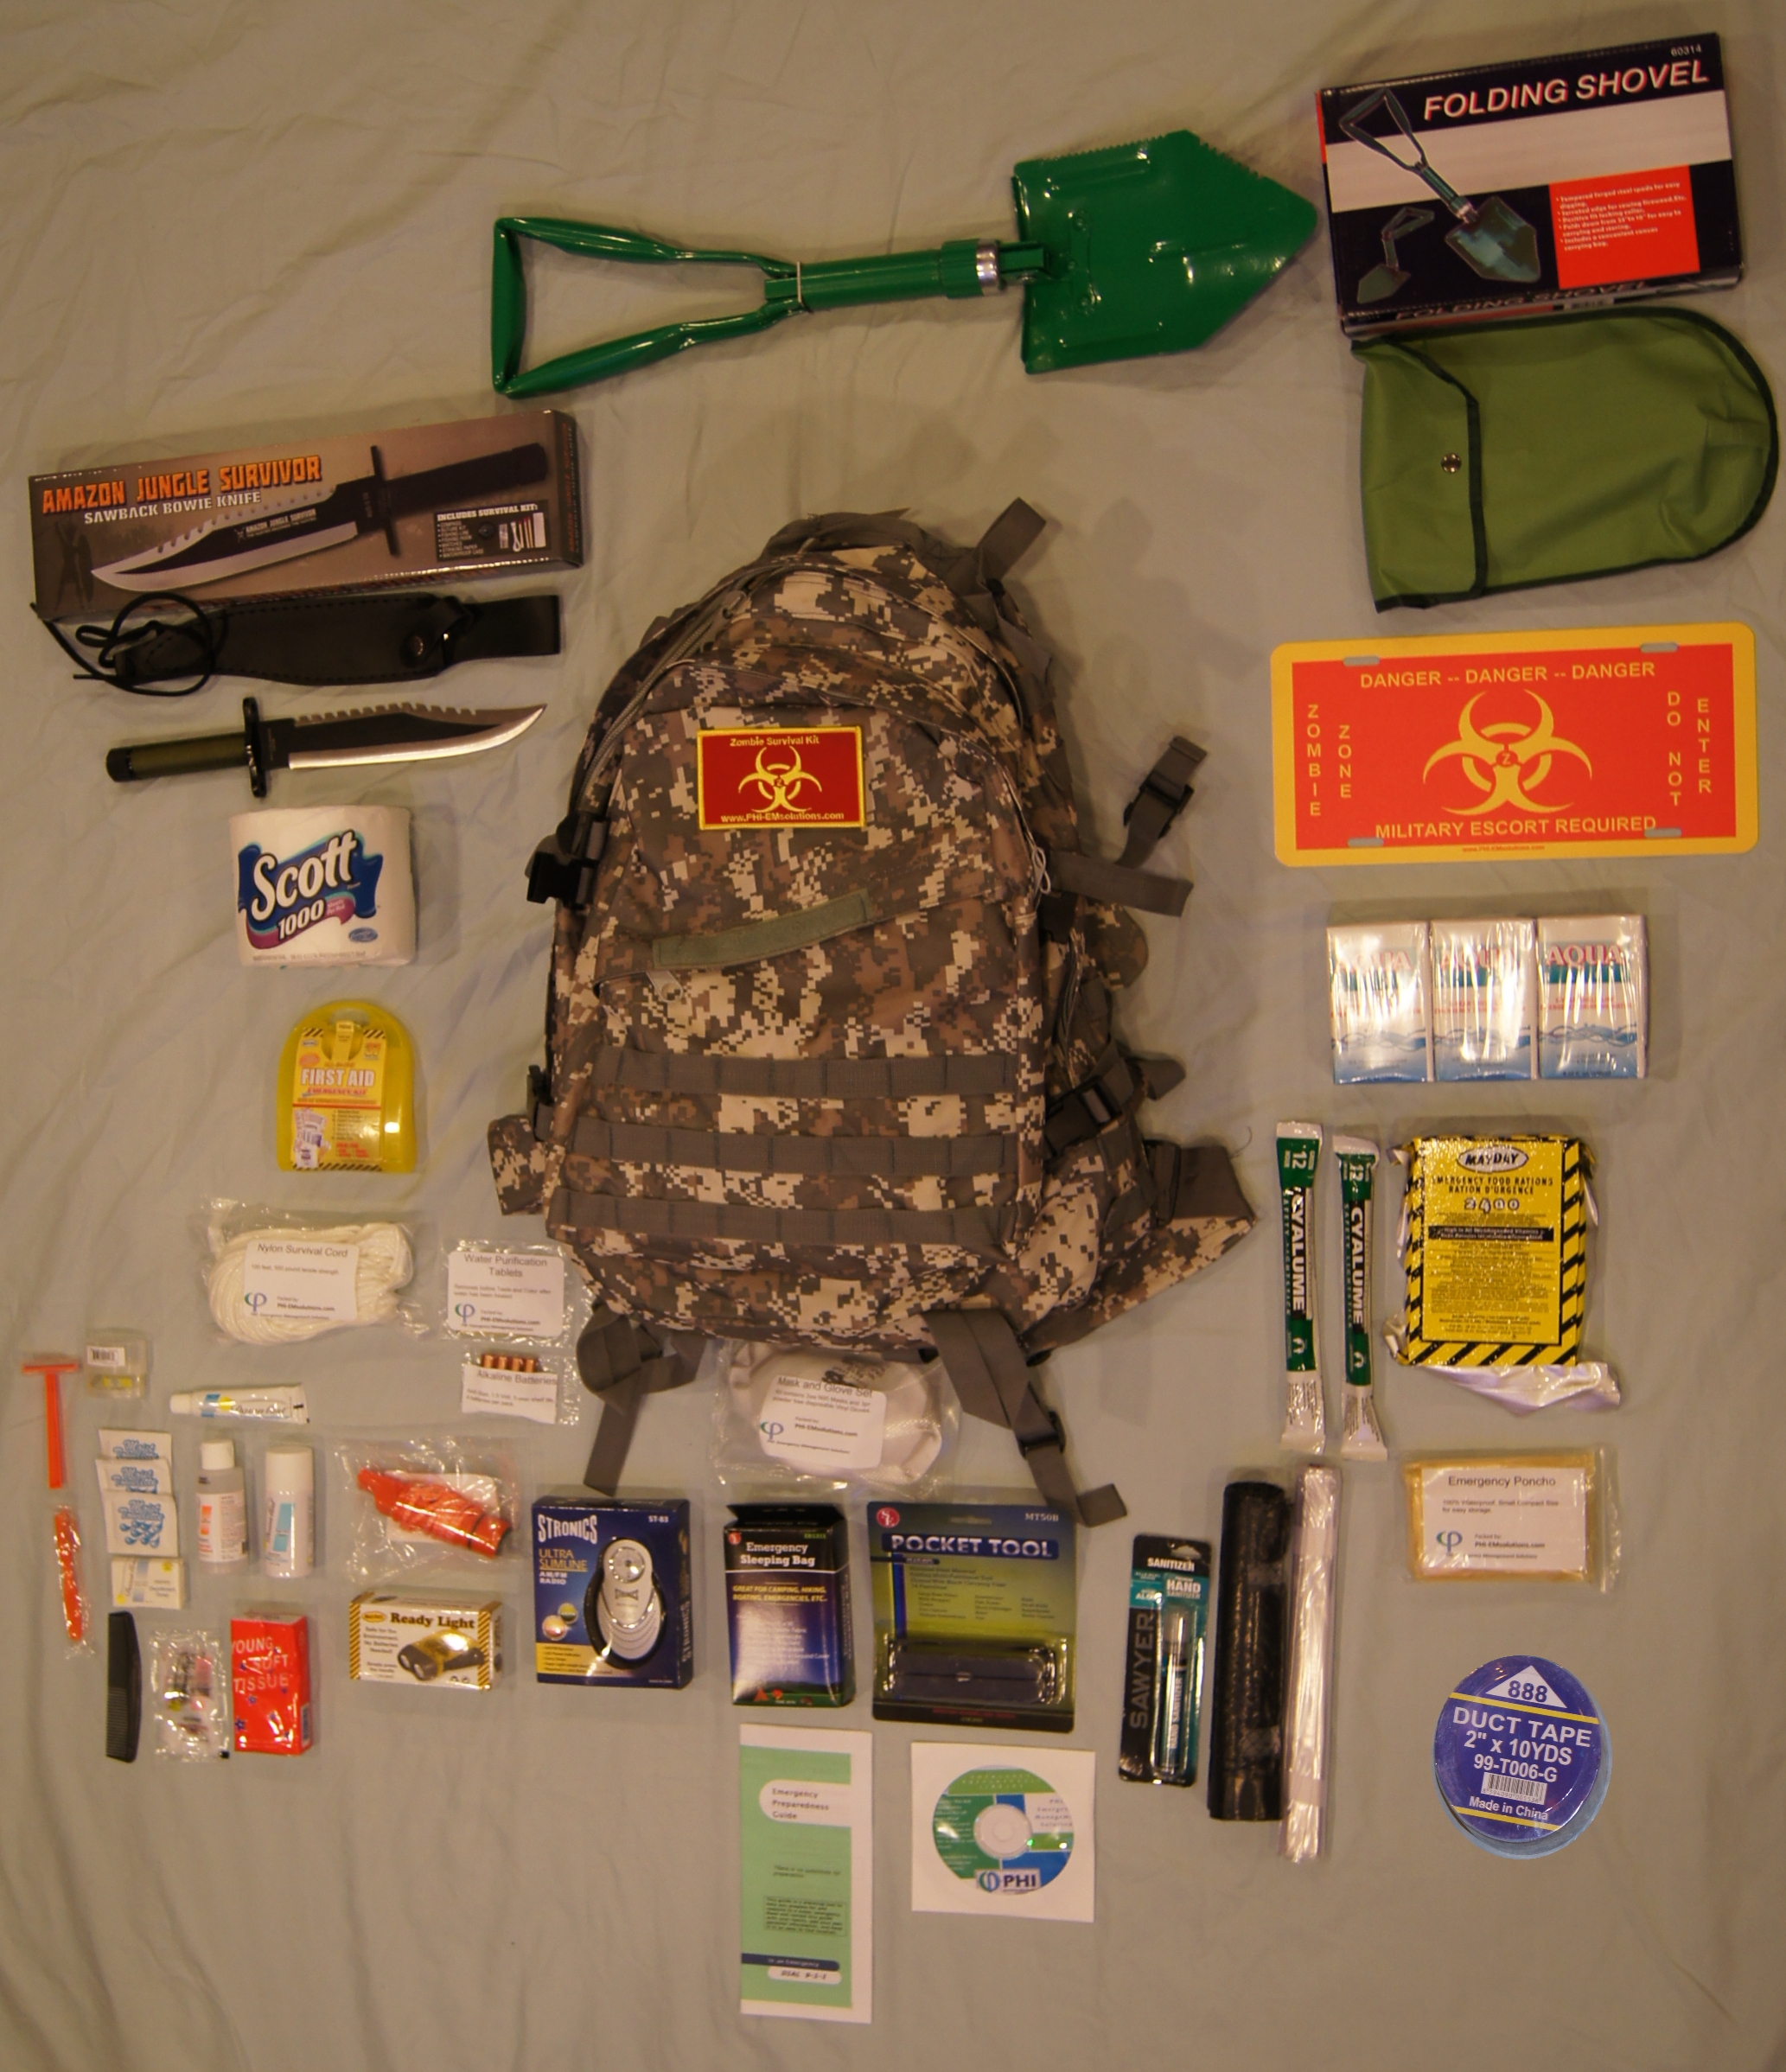 PHI Emergency Management Announces Release of Upgraded Zombie Survival Kits